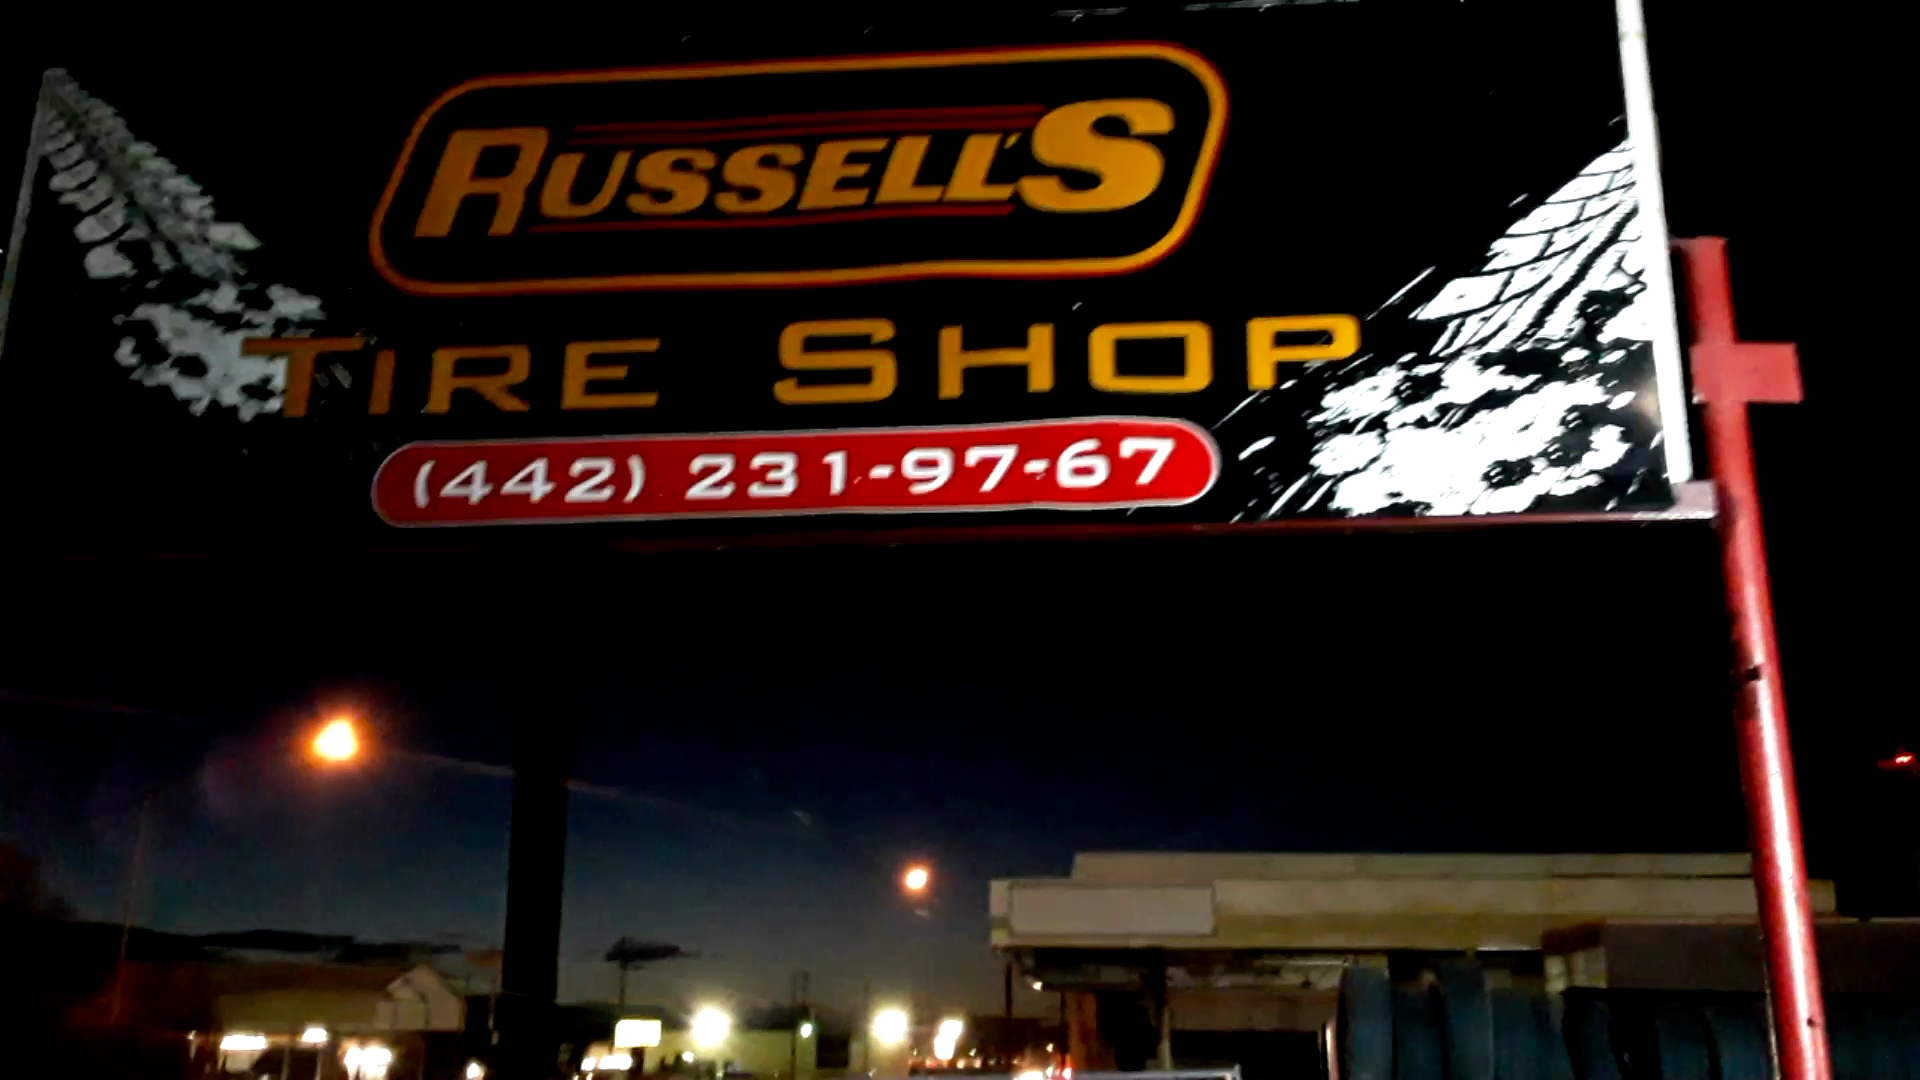 Russell’s Tire Shop